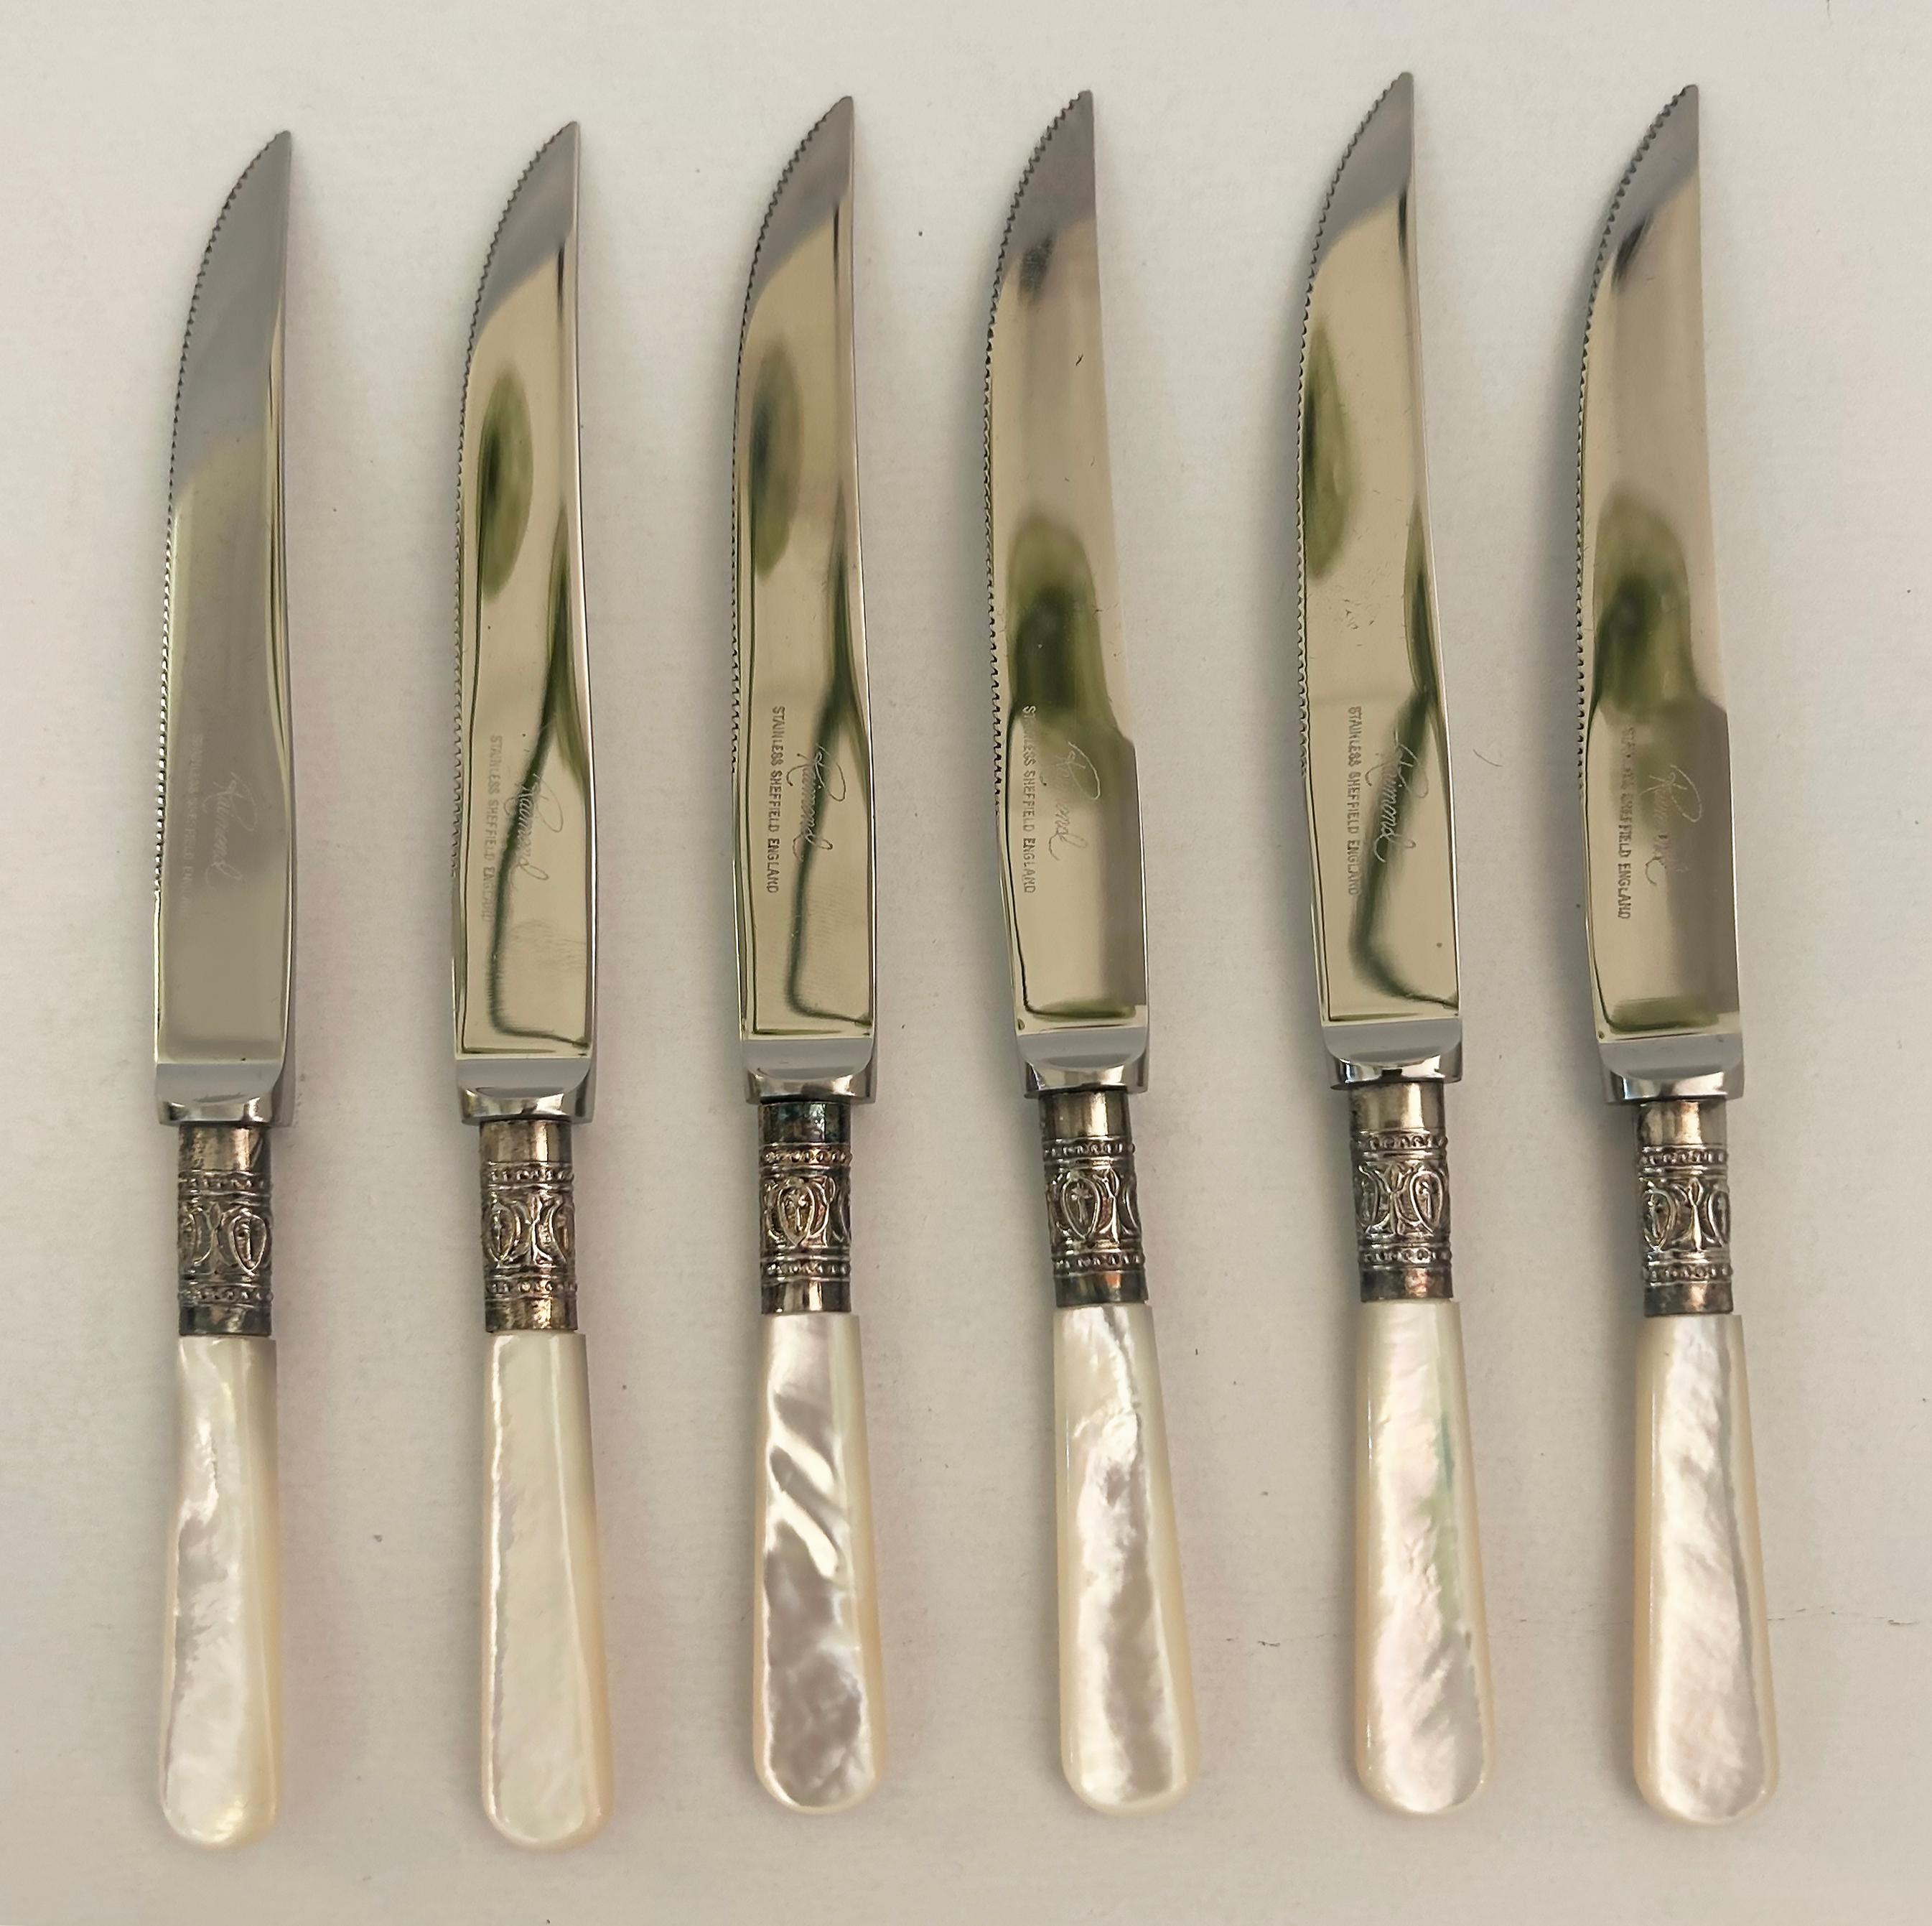 Vintage Raimond Sheffield England Mother-of-Pearl Fruit Knives Silver Plated Set

Offered for sale is a set of six Raimond Silver Manufacturers, Sheffield, England mother-of-pearl and silver-plated fruit knives in their original tooled leather case.